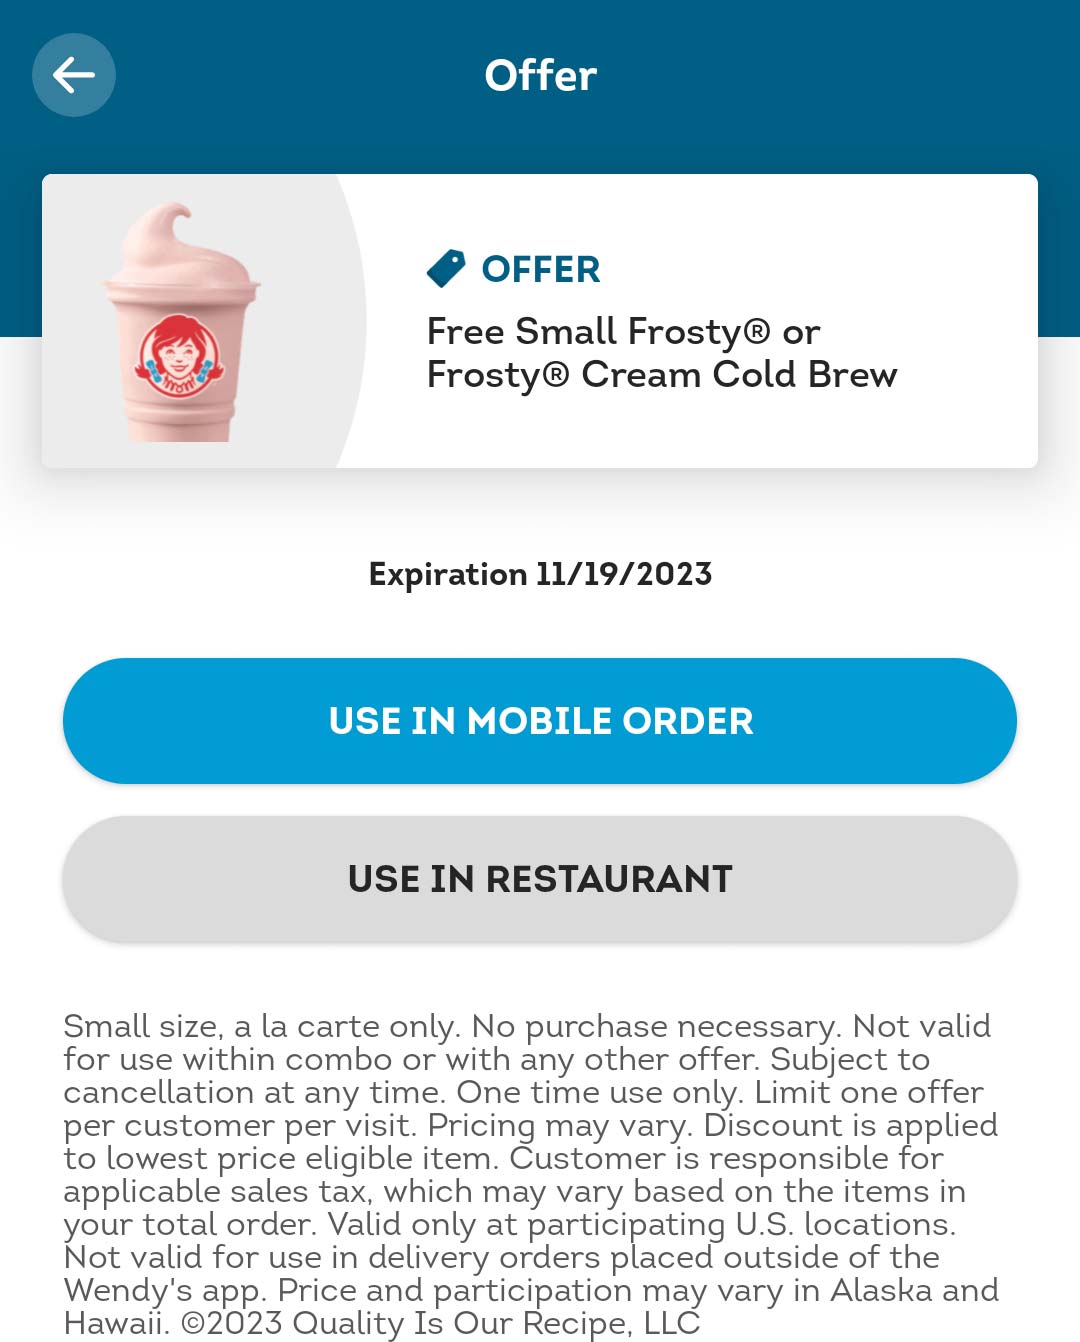 Free peppermint frosty or cold brew via mobile today at Wendys restaurants #wendys